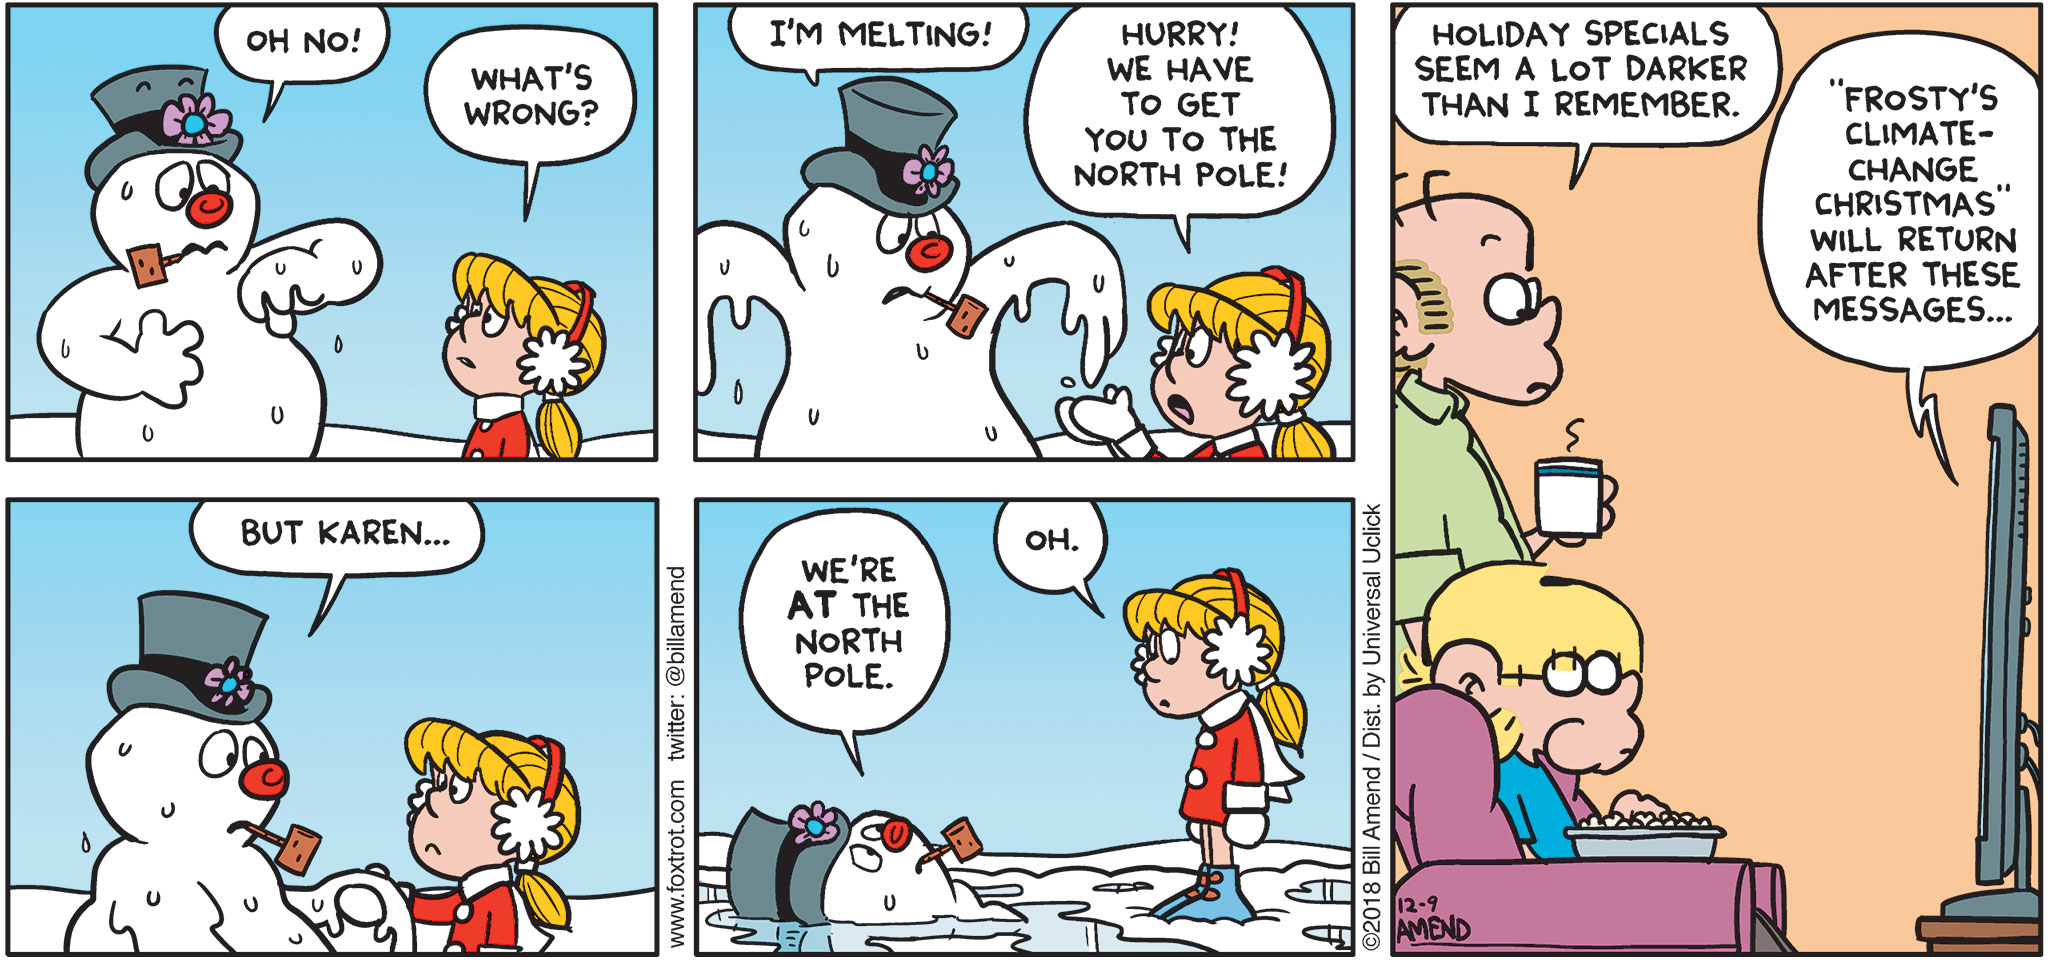 FoxTrot by Bill Amend - "Not So Frosty" published December 9, 2018 - [Jason and Roger watching Frosty the Snowman holiday special on TV] Frosty says: OH NO! Karen says: What's wrong? Frosty says: I'm melting! Karen says: Hurry! We have to get to the North Pole! Frosty says: But Karen ... We're AT the North Pole. Karen says: Oh. Roger says: Holiday specials seem a lot darker than I remember. TV says: "Frosty's Climate-Change Christmas" will return after these messages...